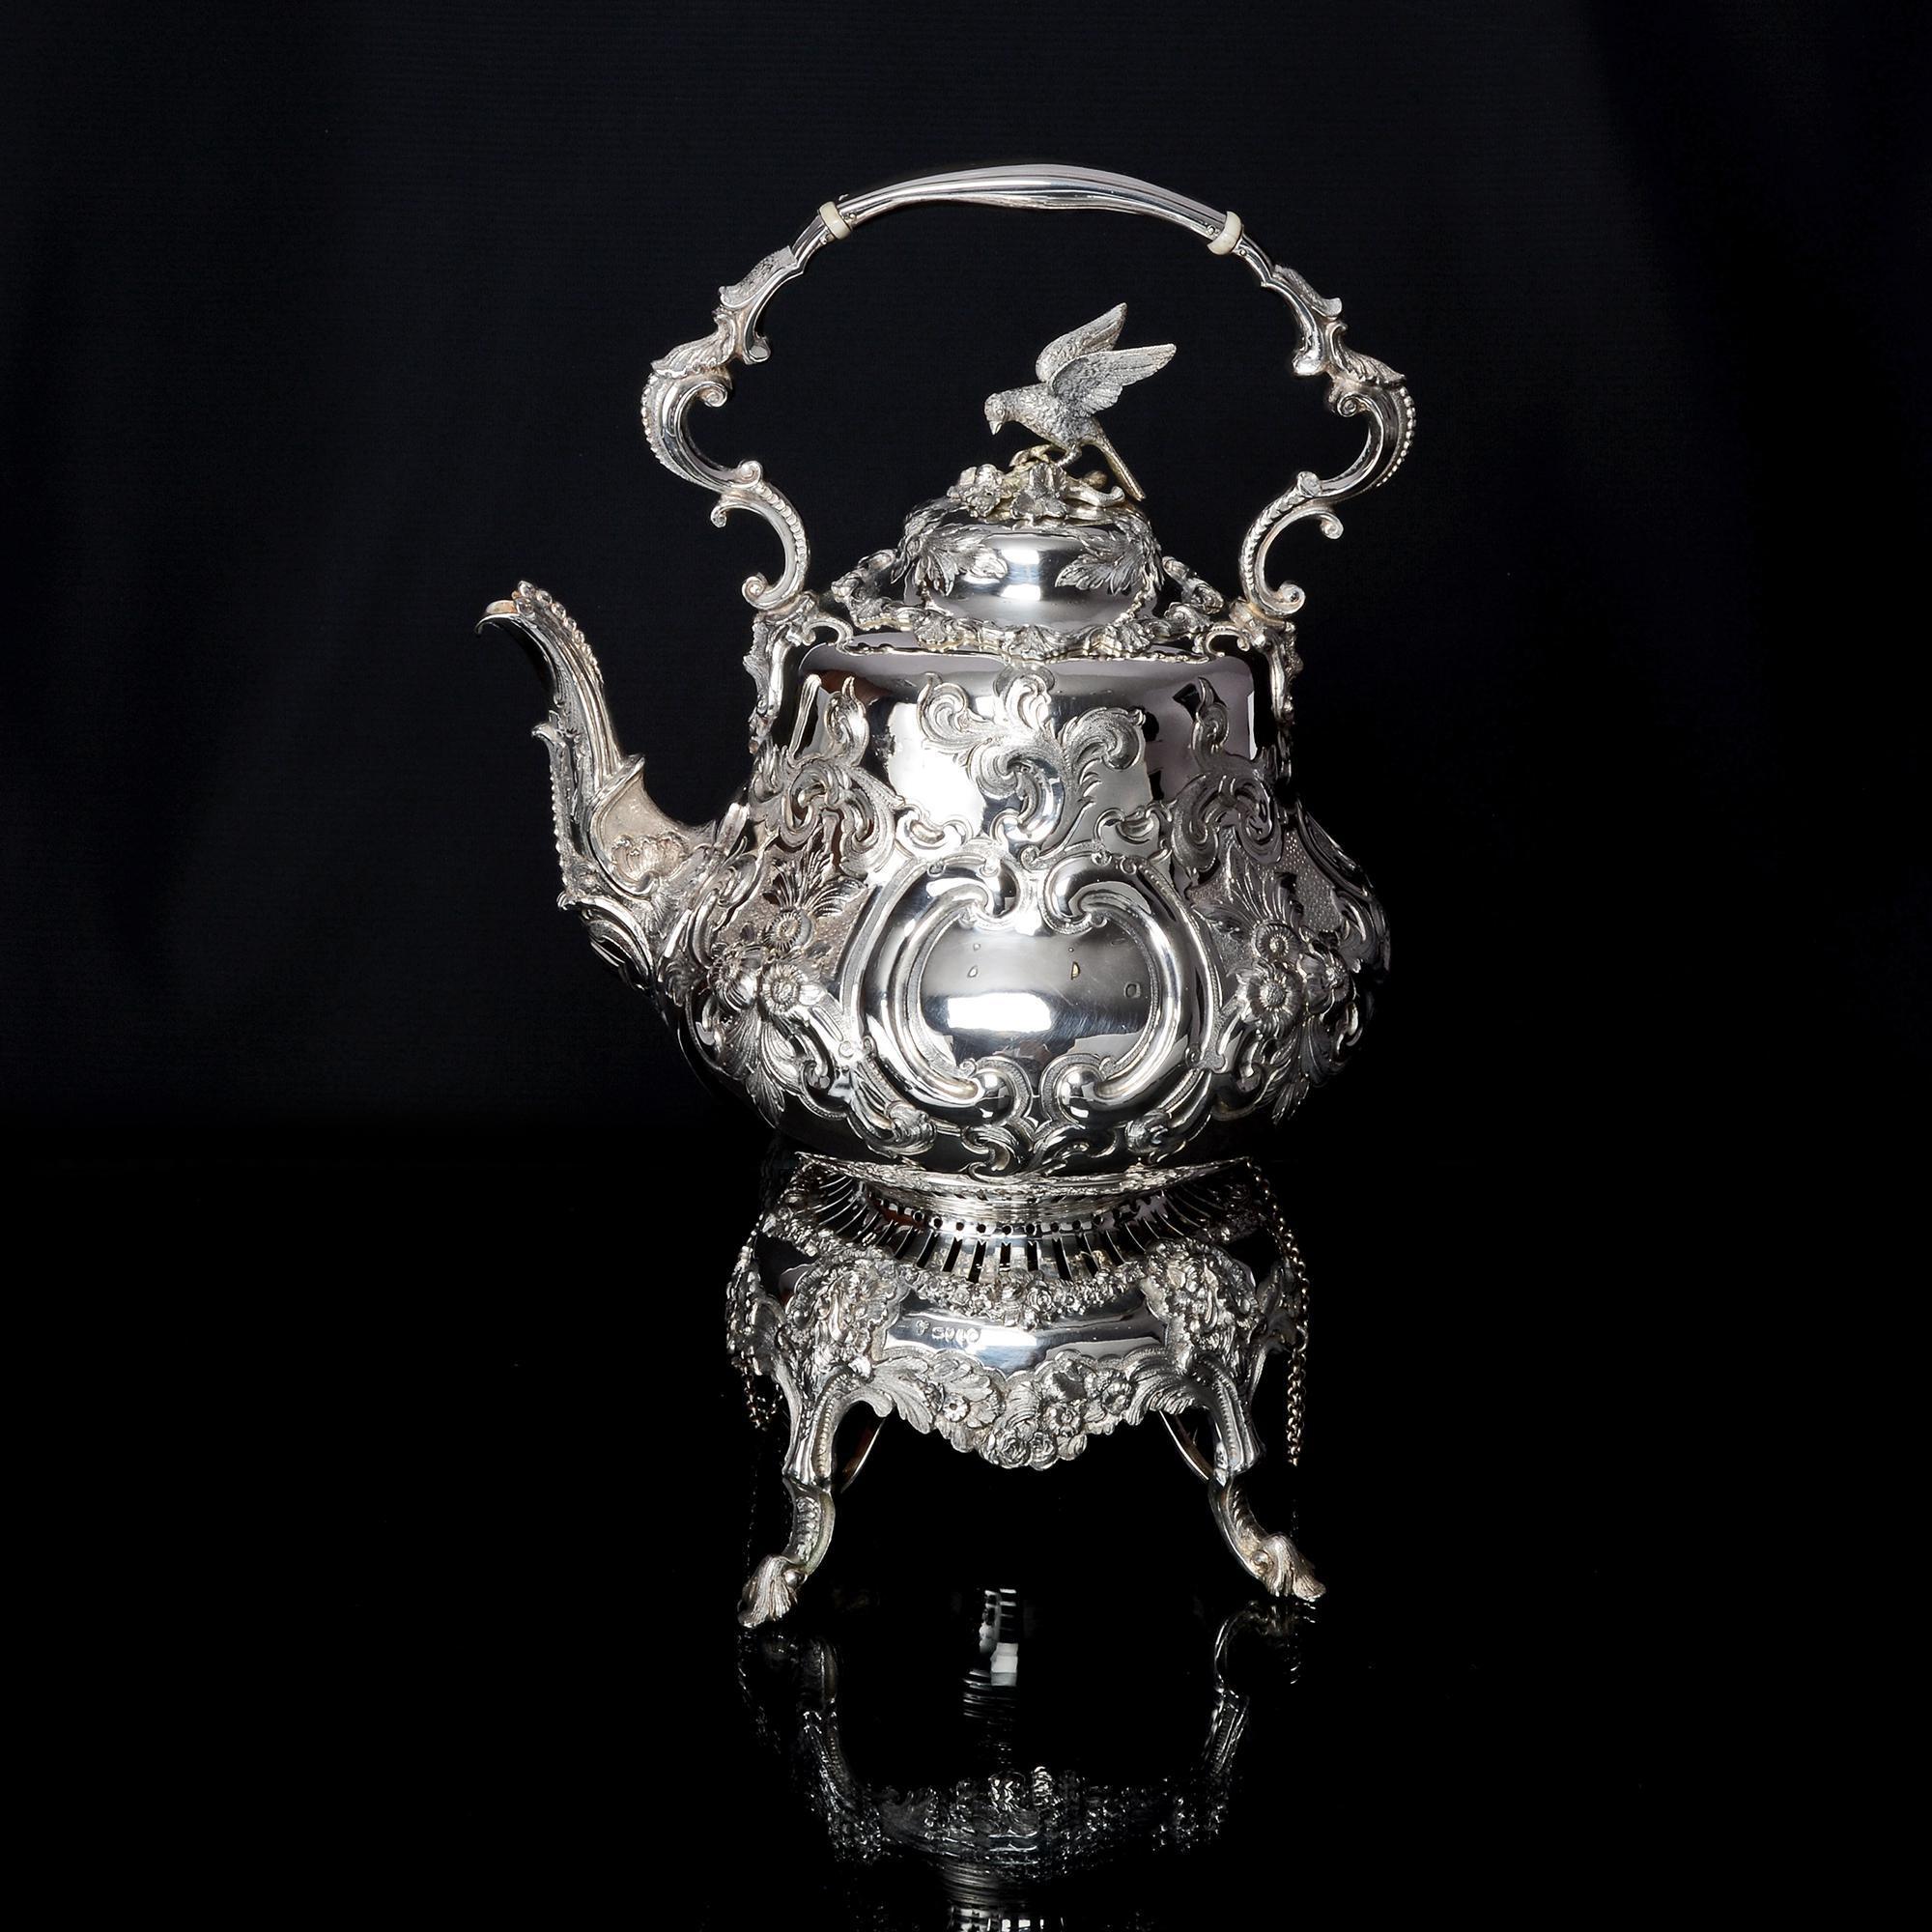 A superb quality antique silver five piece Louis pattern silver tea and coffee service comprising a kettle on its stand and fitted with a burner, a teapot, coffee pot, milk jug and sugar bowl. The latter two pieces have gilded interiors. The kettle